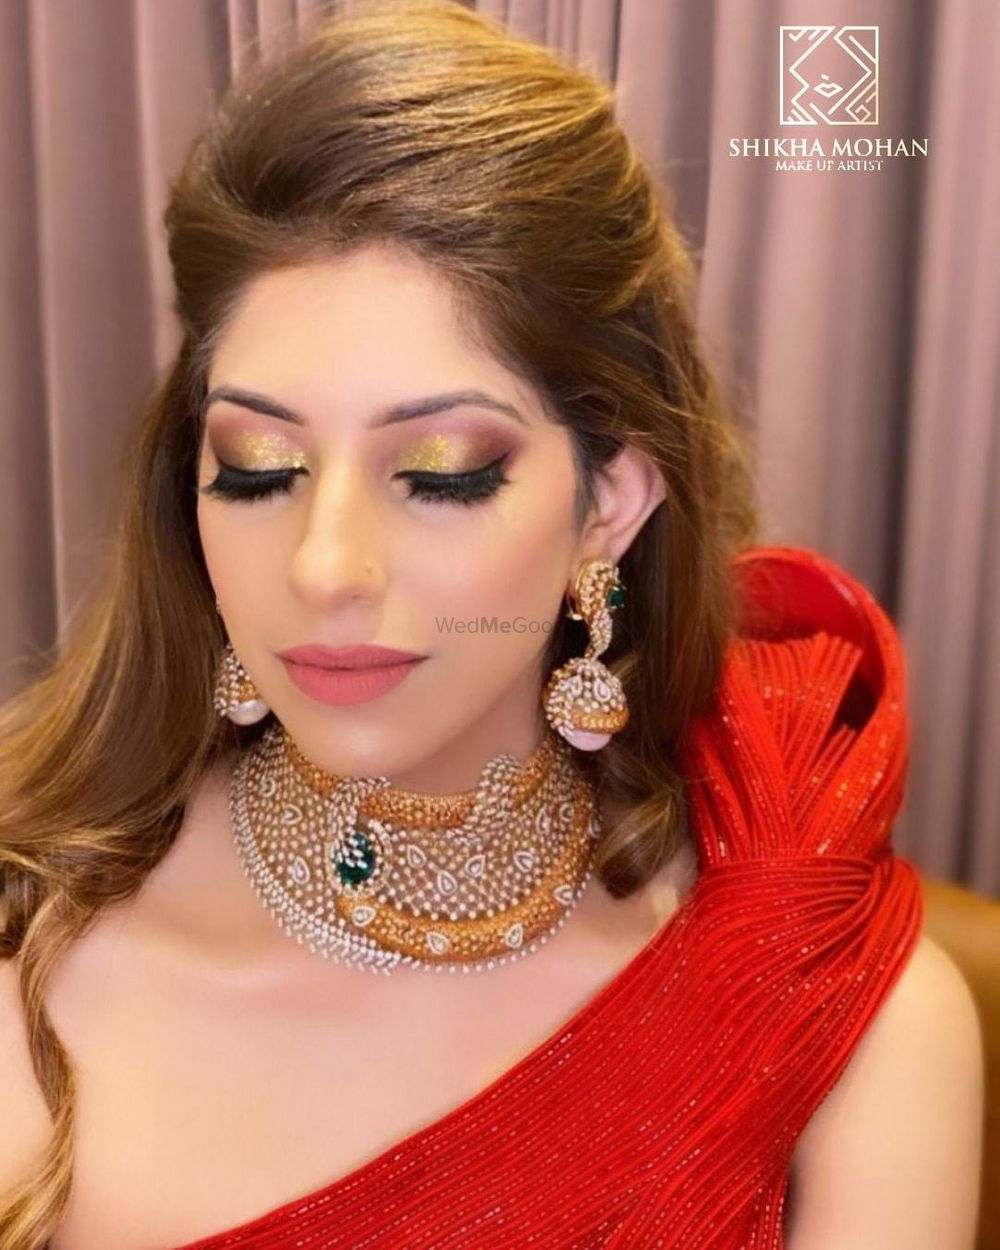 Photo From Engagement and other function makeups 2019 - By Makeup Artist- Shikha Mohan